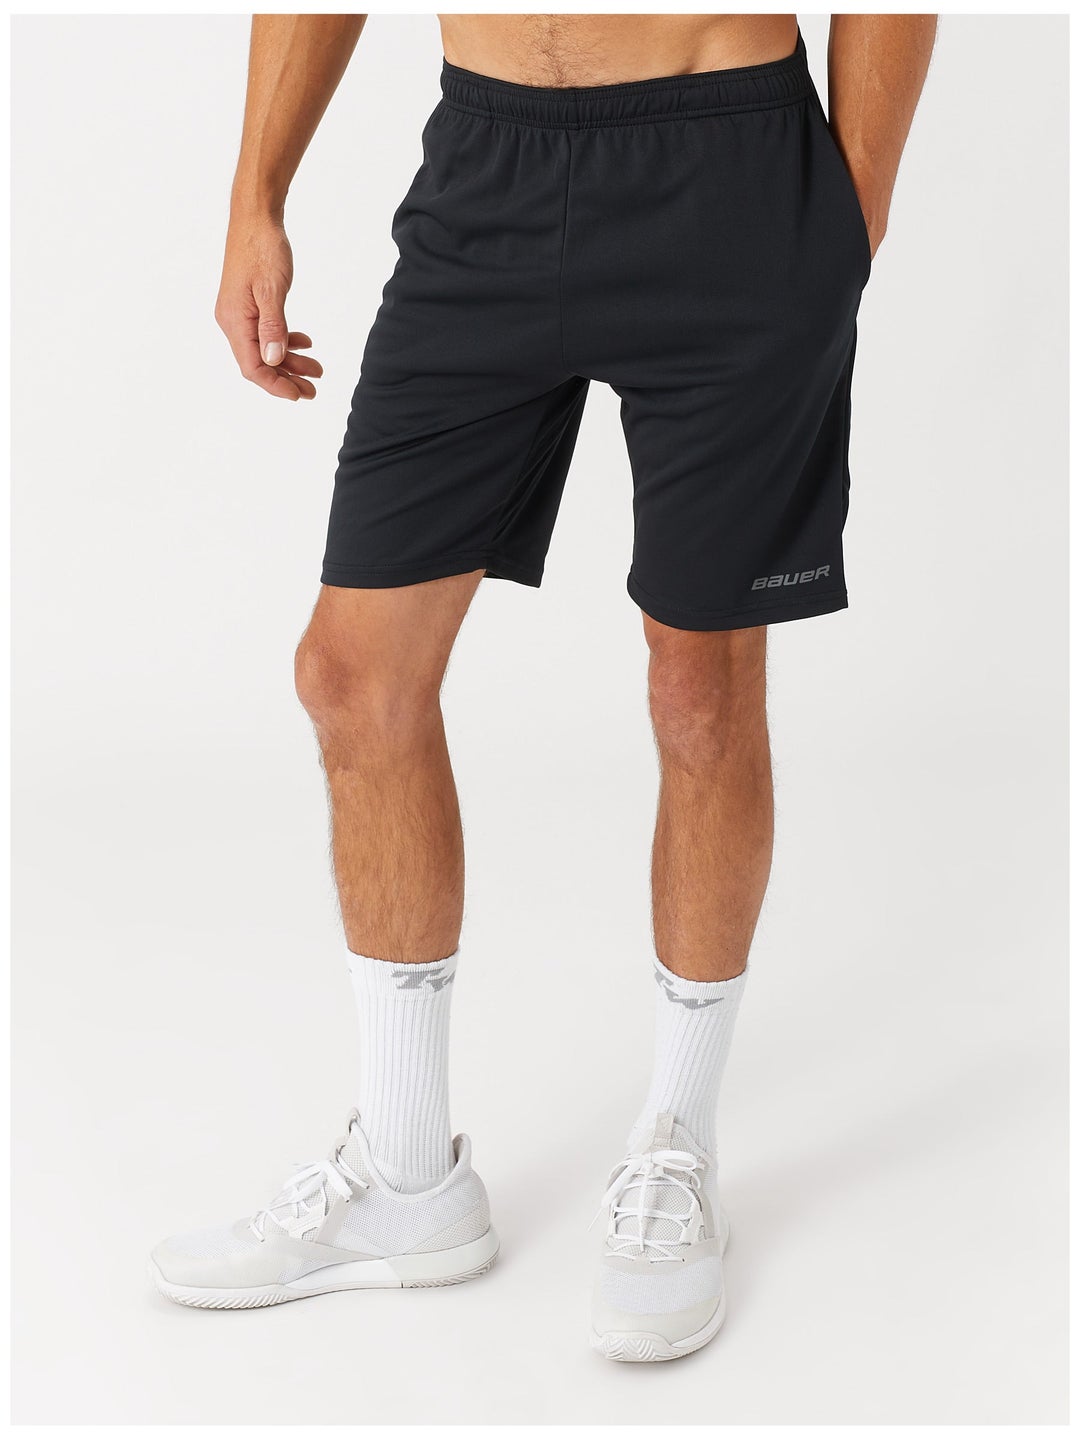 Bauer Core Training Shorts - Youth - Inline Warehouse